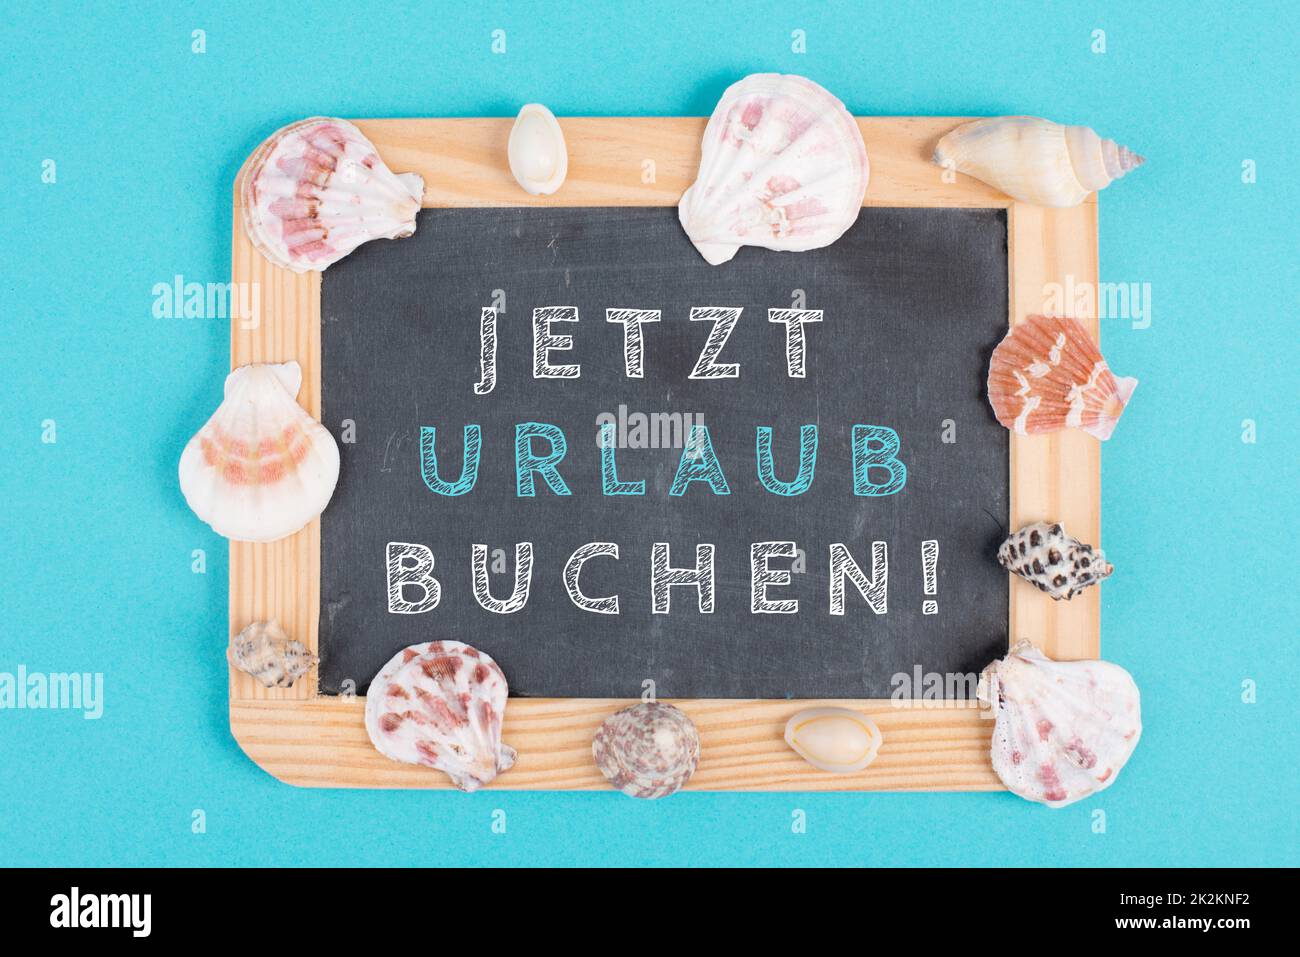 Book vacation now is standing in german language on the chalkboard, seashells bulit frame, holiday and summertime topic, travel concept Stock Photo